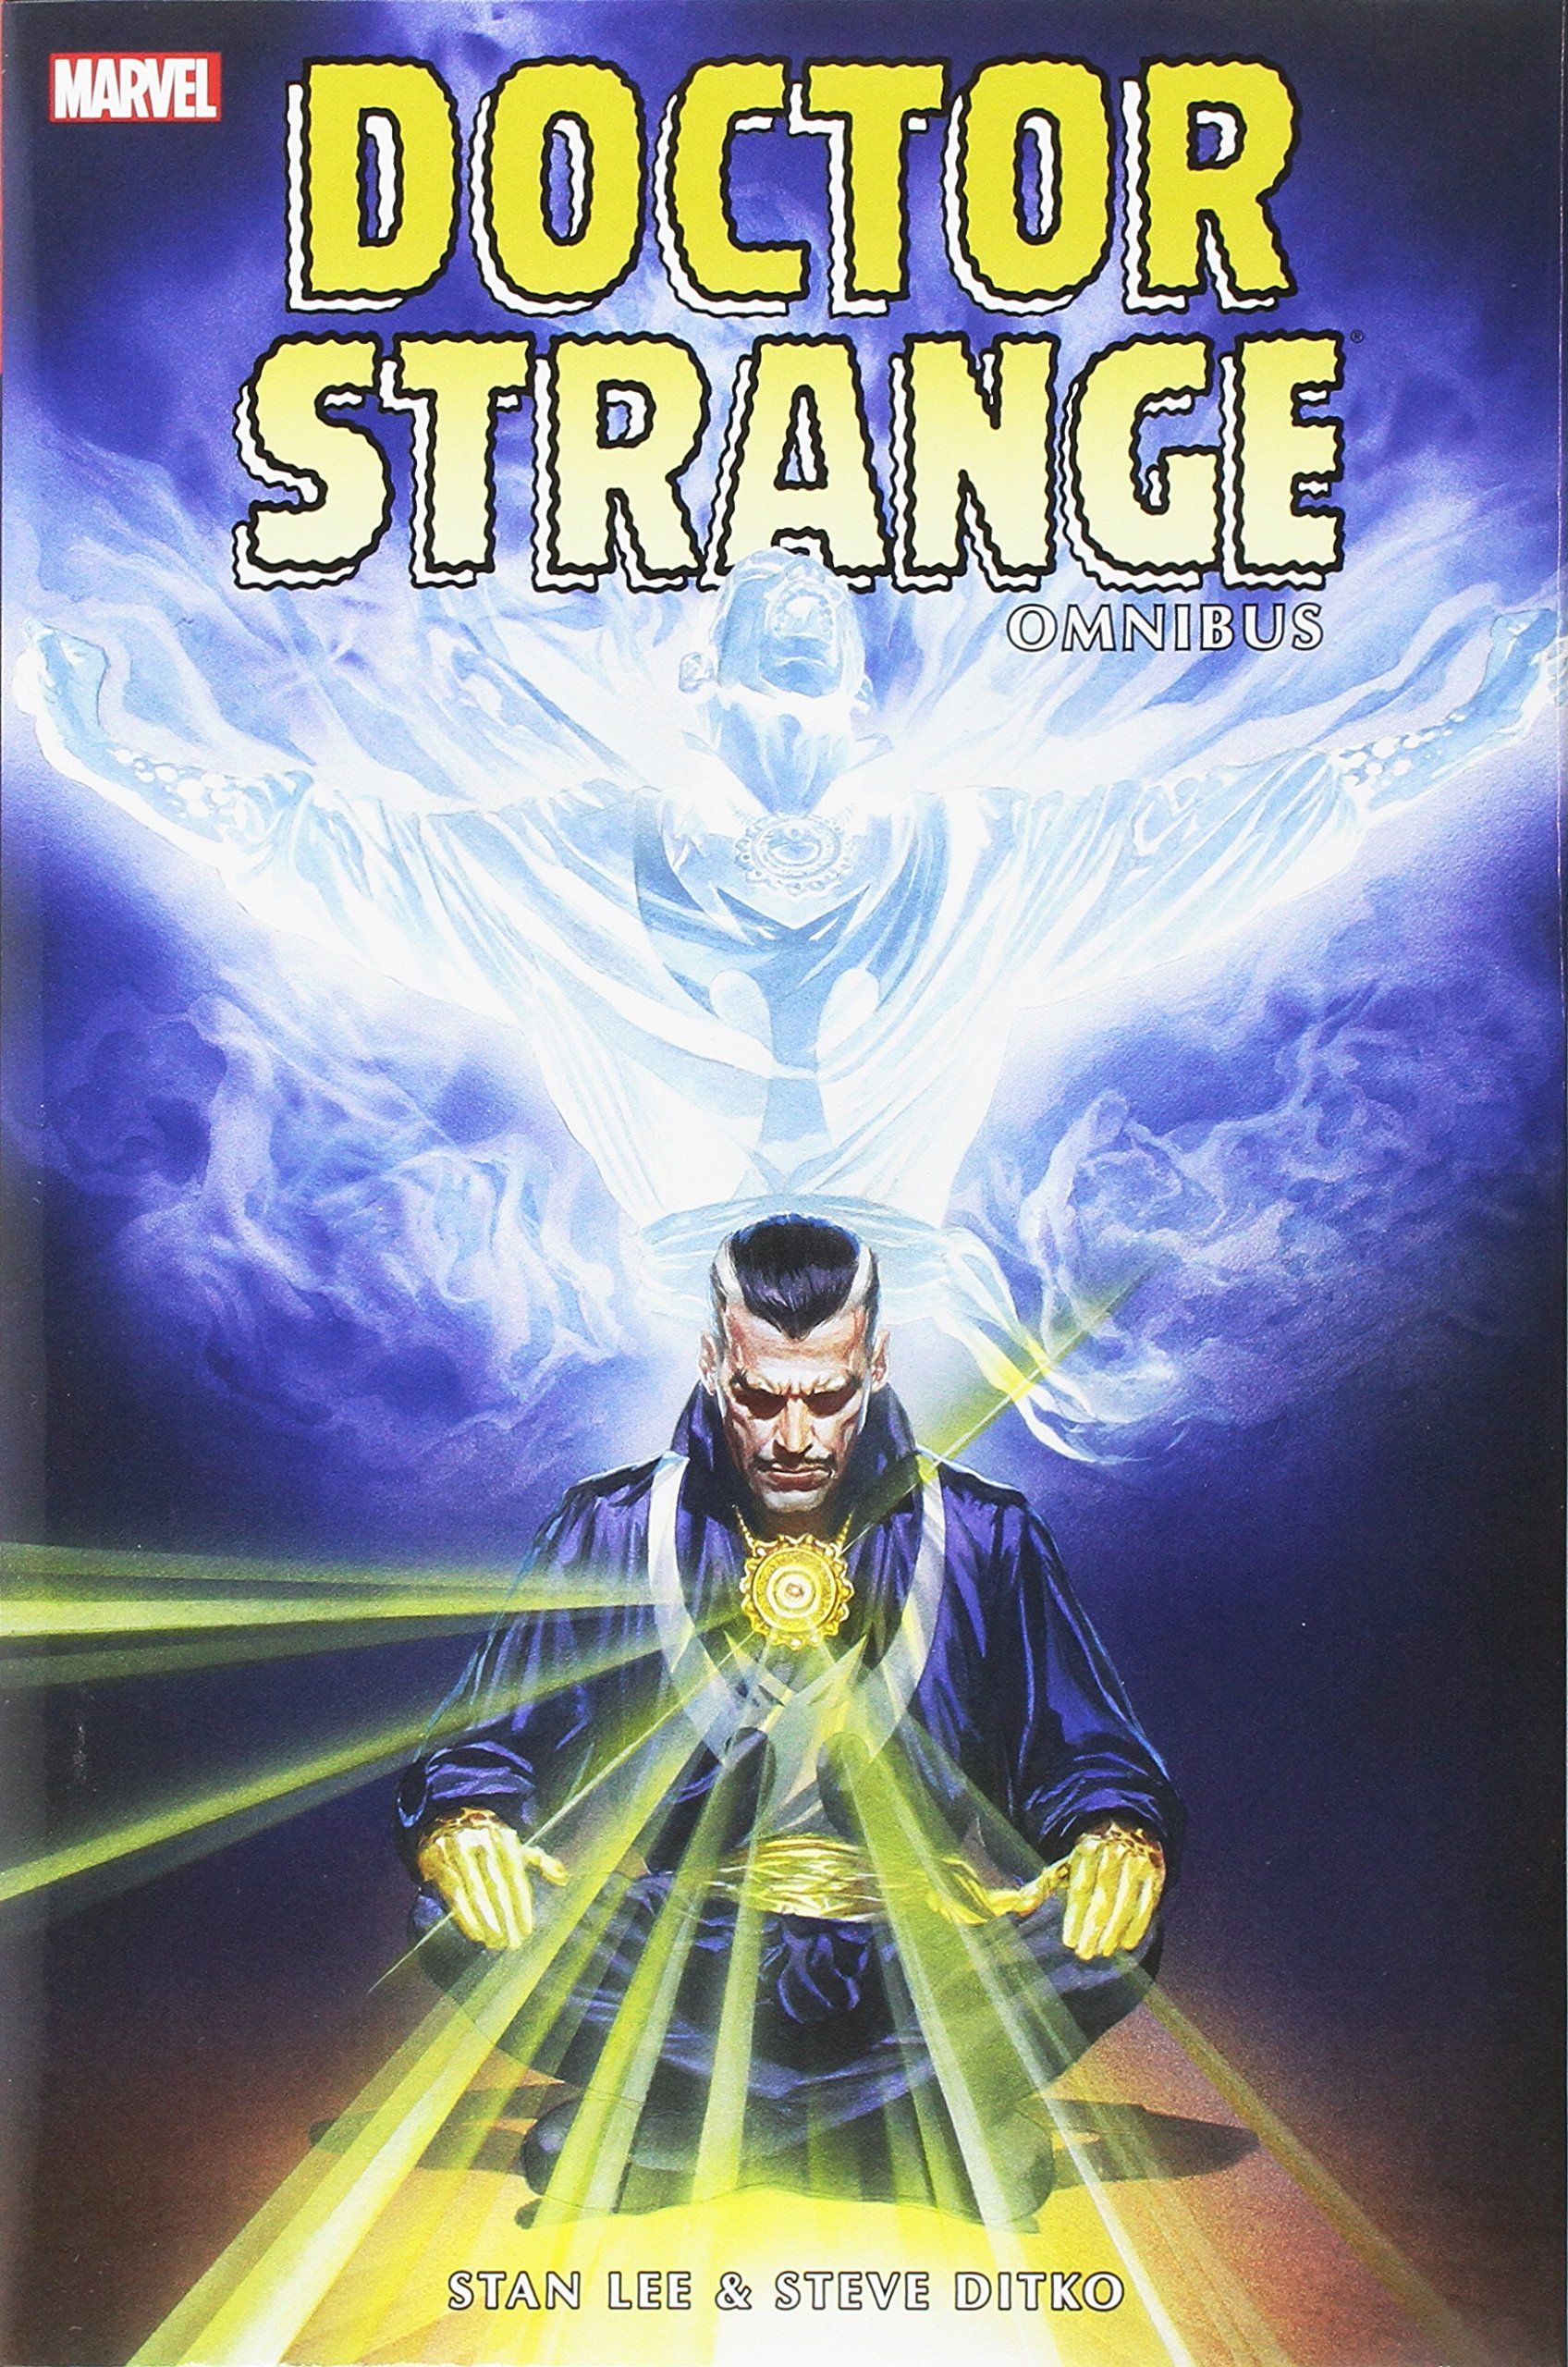 doctor strange vol 1 the way of the weird